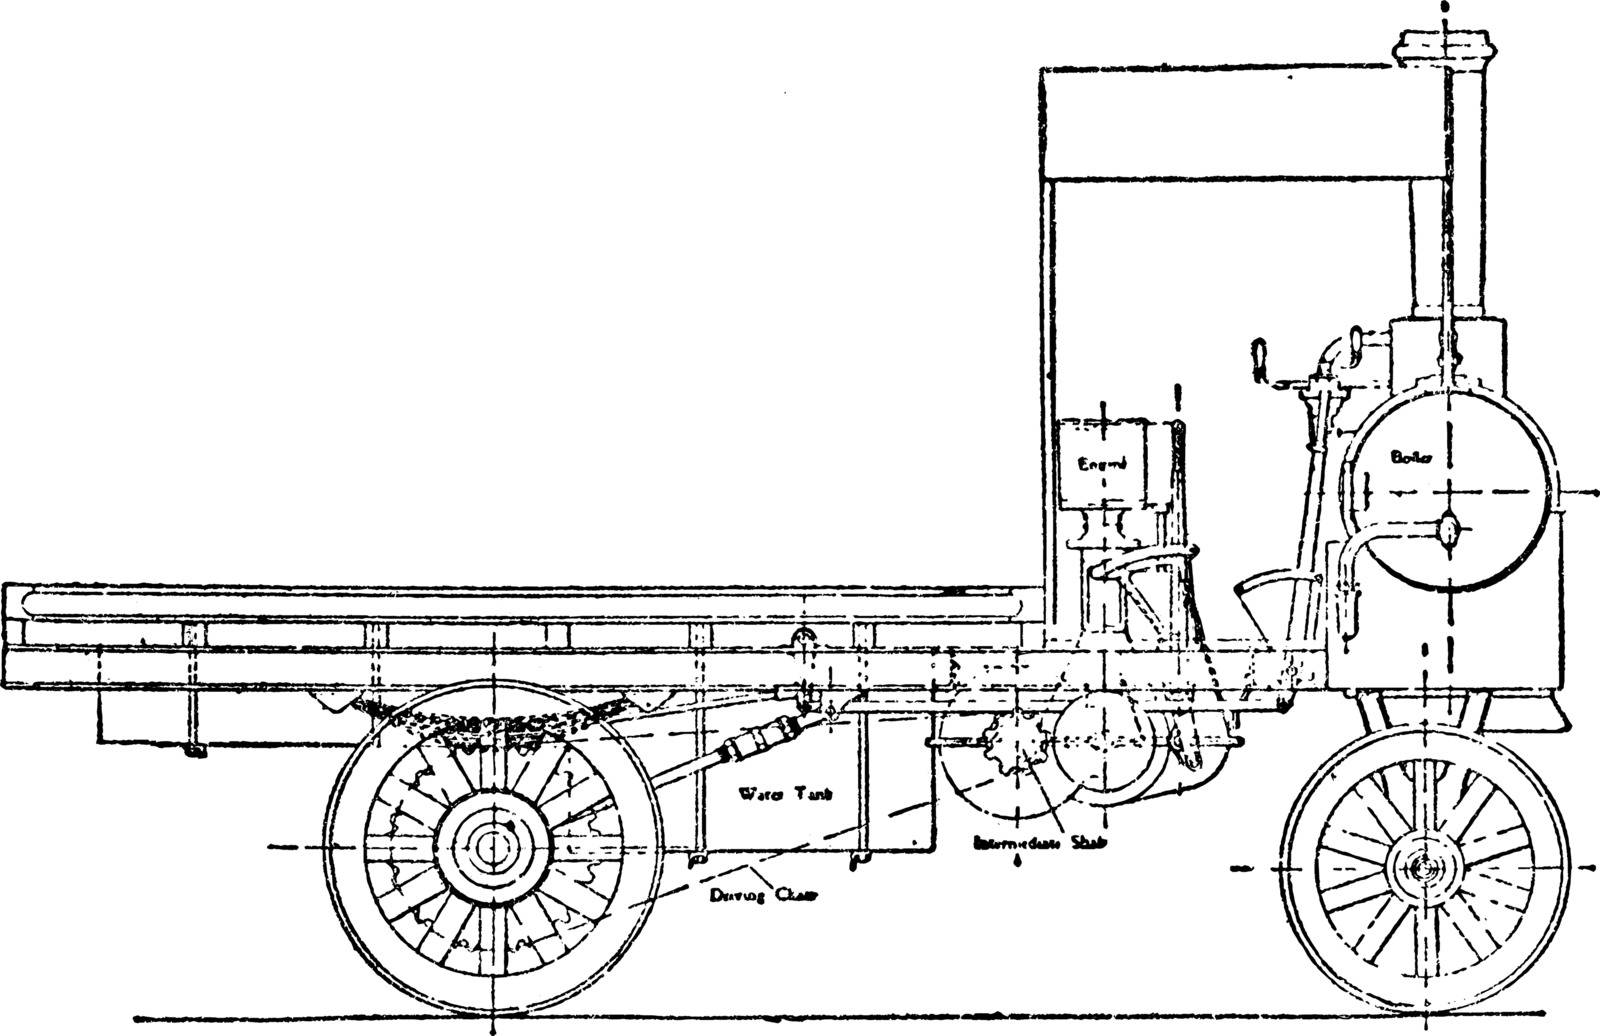 Yorkshire Steam Wagon Patent with unique boiler construction, vintage line drawing or engraving illustration.